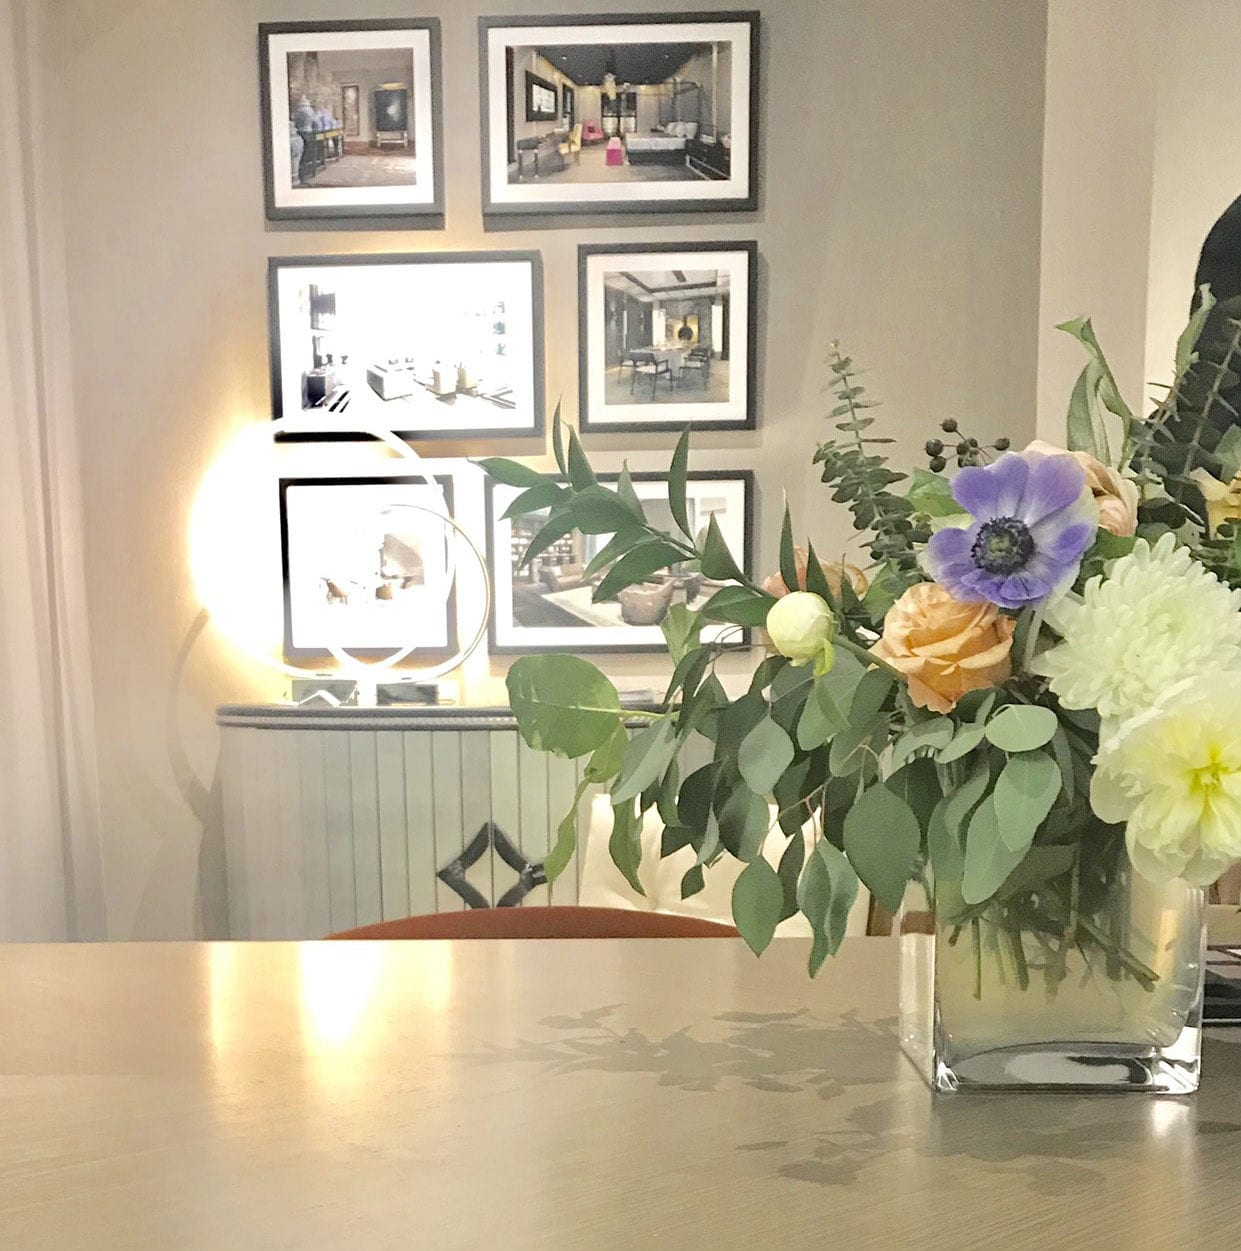 Table with flower arrangement and framed photographs in background